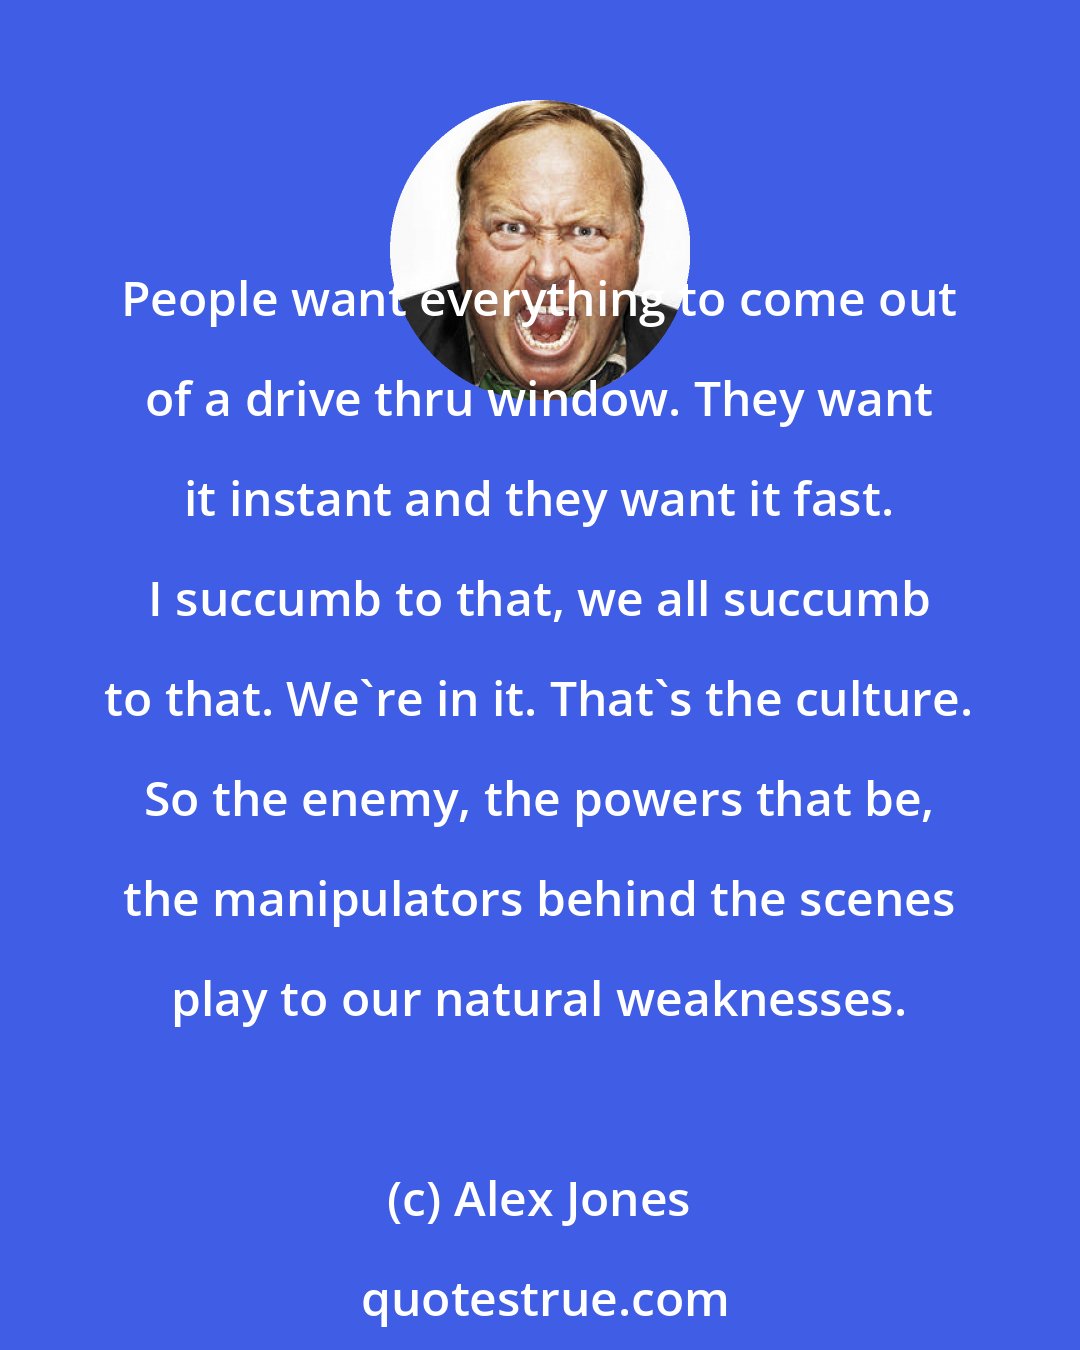 Alex Jones: People want everything to come out of a drive thru window. They want it instant and they want it fast. I succumb to that, we all succumb to that. We're in it. That's the culture. So the enemy, the powers that be, the manipulators behind the scenes play to our natural weaknesses.